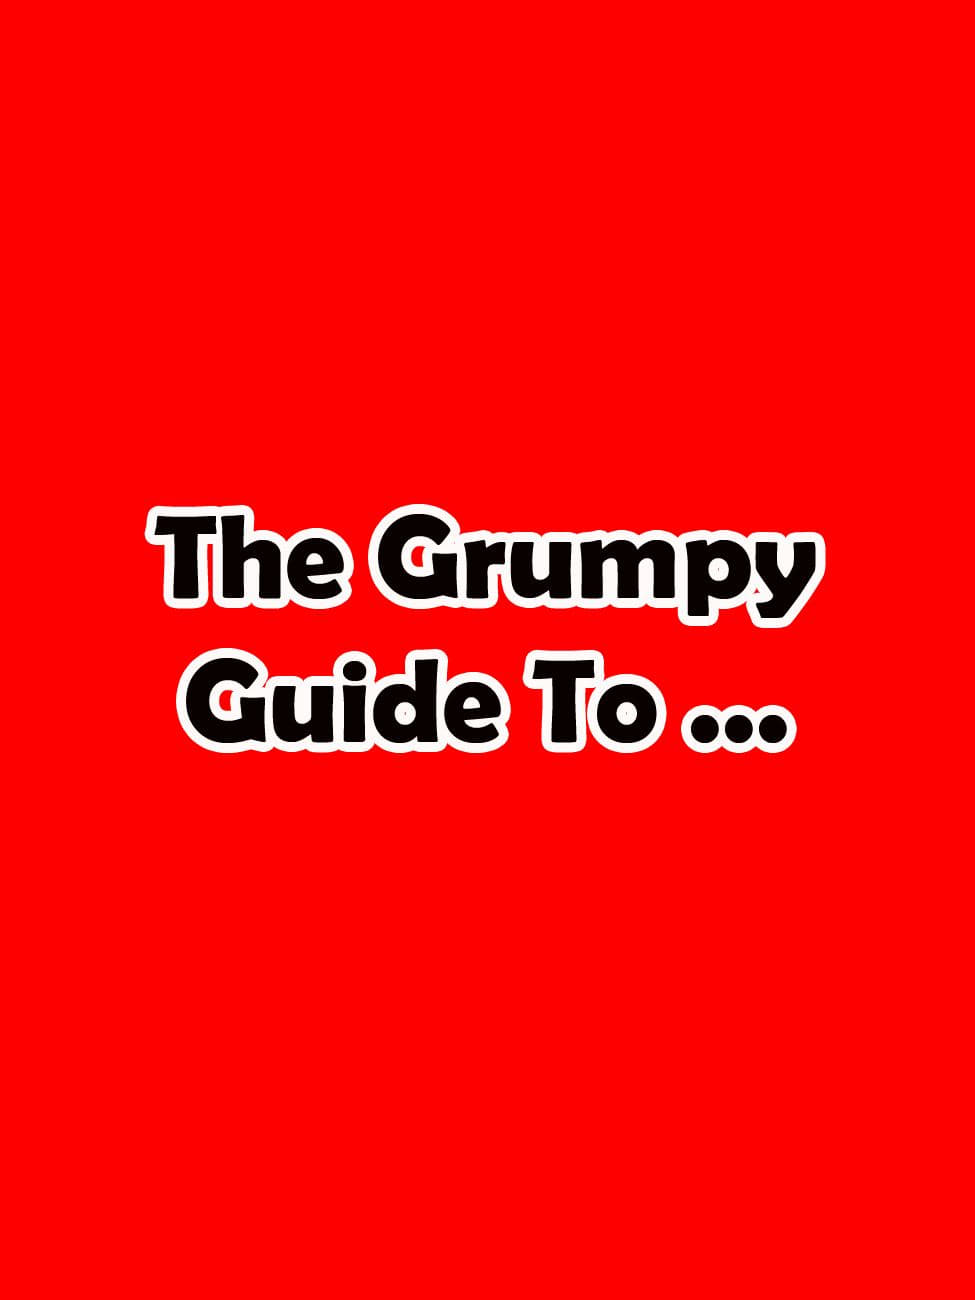 The Grumpy Guide To